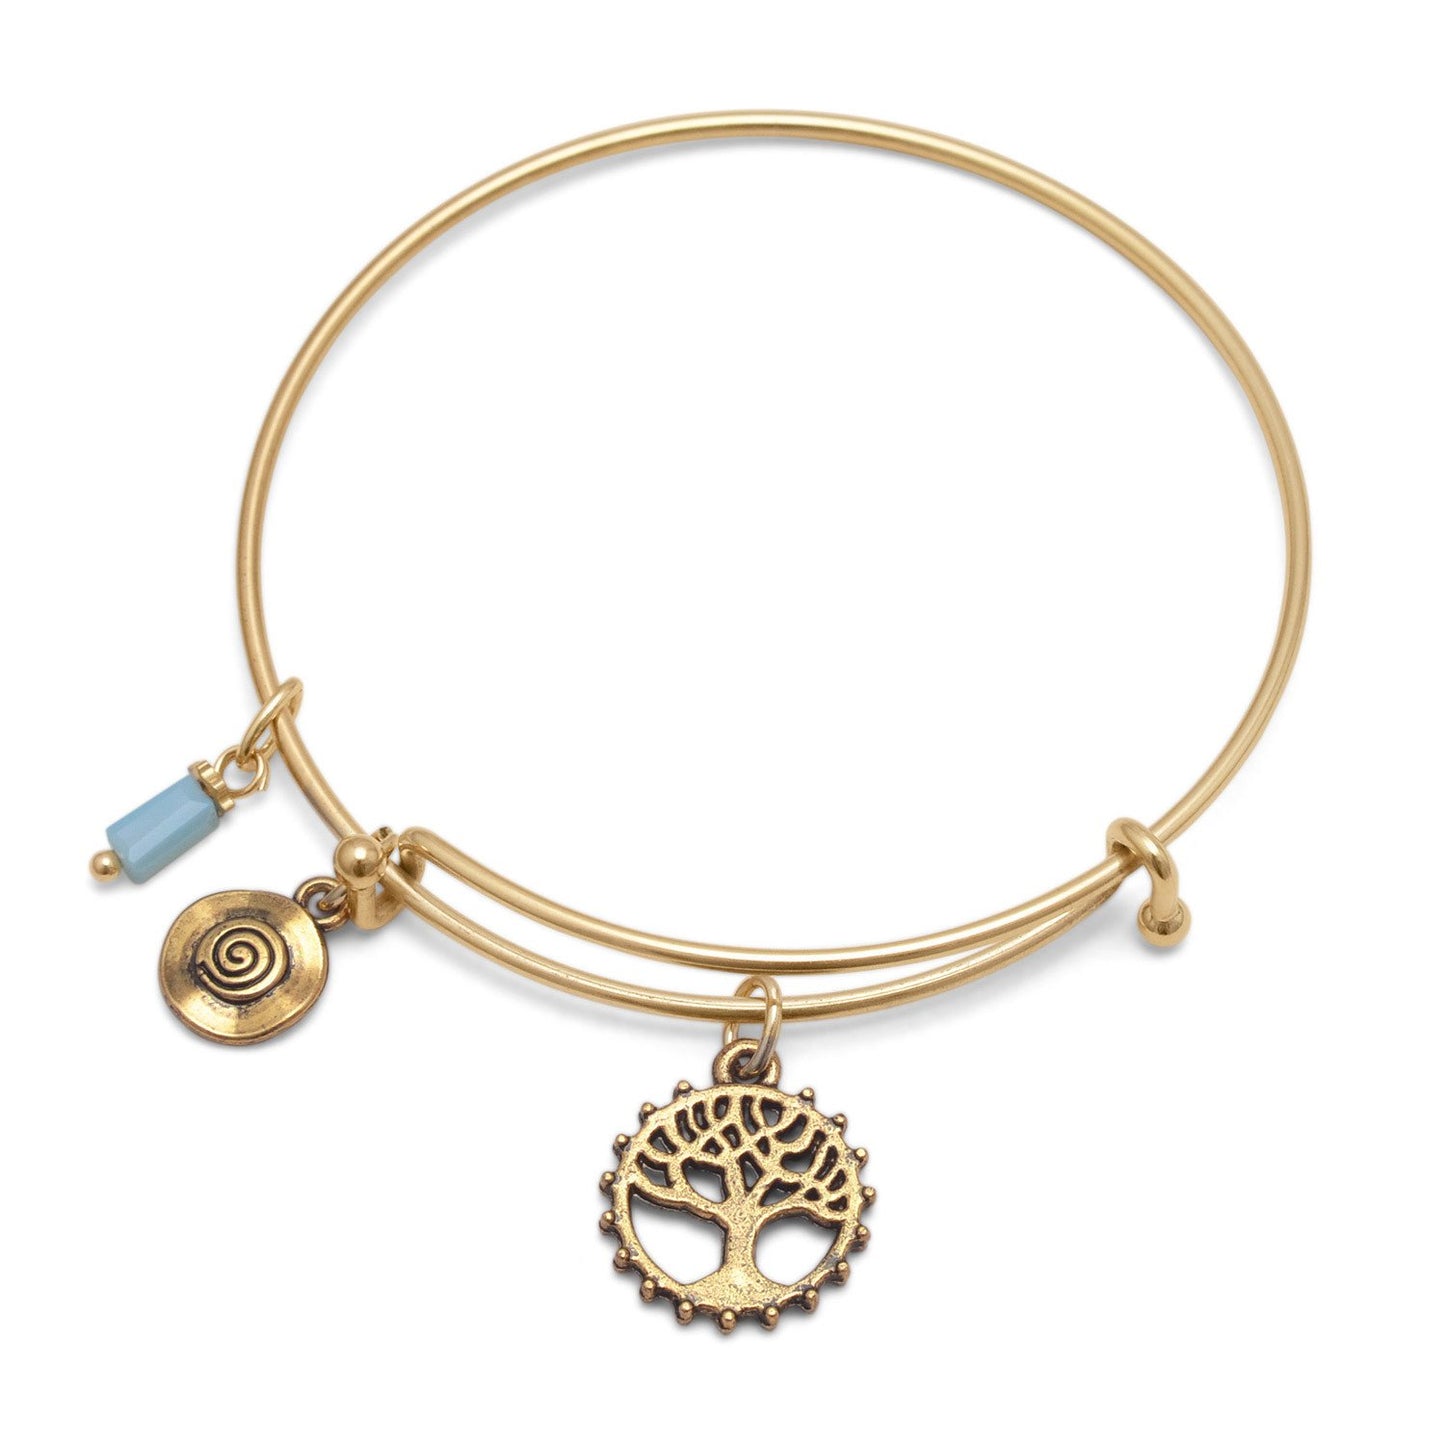 1.5mm Polished Gold Plated Round Charm Bracelet, 8 inches (SKU: BR-EXB1008)